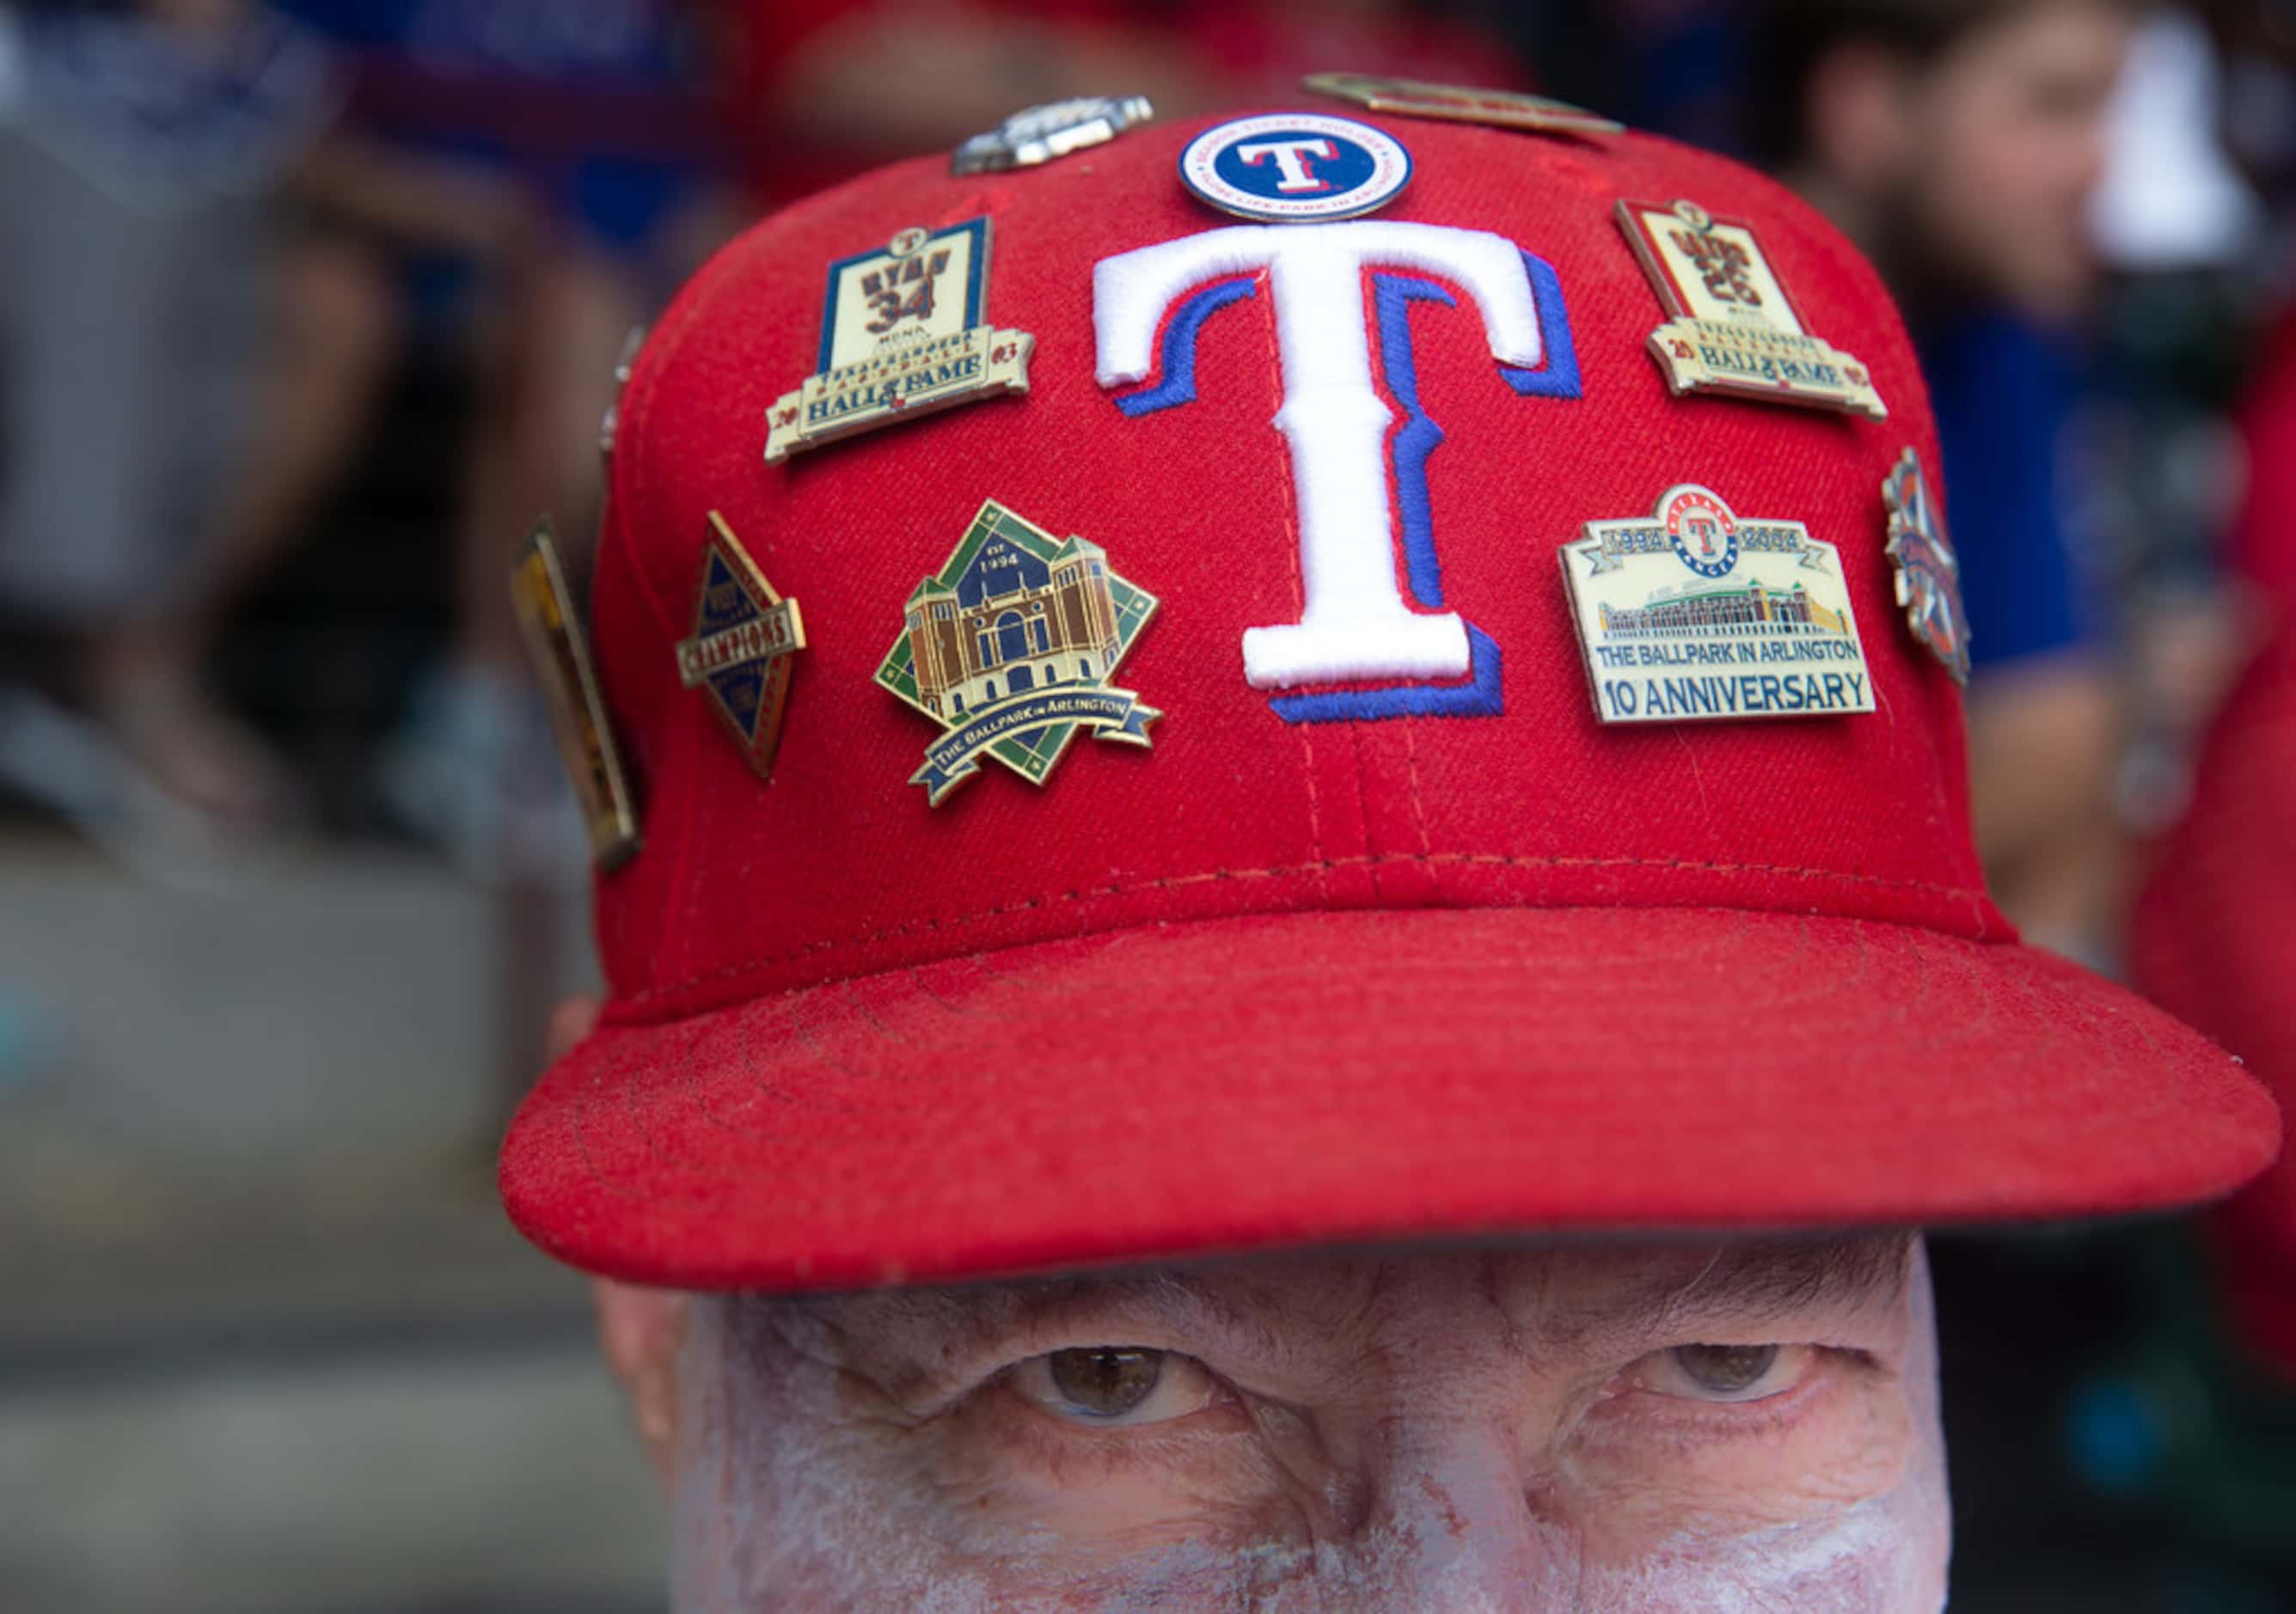 Jim Perkins, from Dallas, shows his collection of Texas Rangers hat pins during the Rangers'...